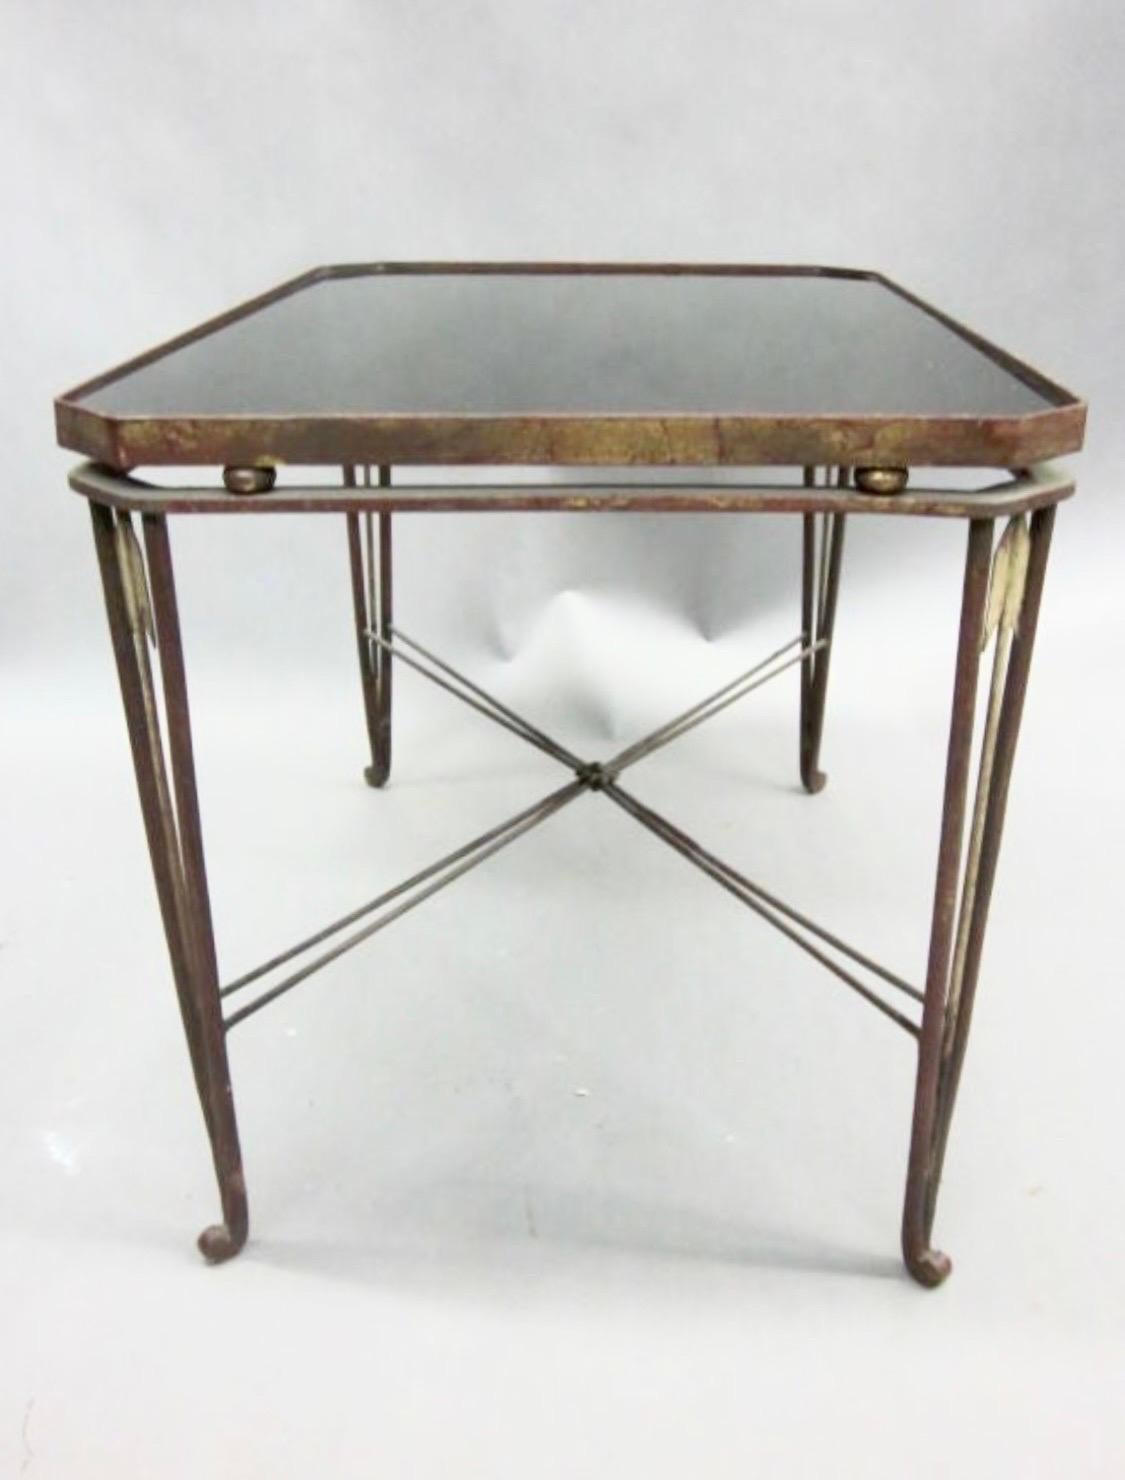 French Mid-Century Modern Neoclassical Gilt Iron Coffee Table by Maison Jansen In Good Condition For Sale In New York, NY